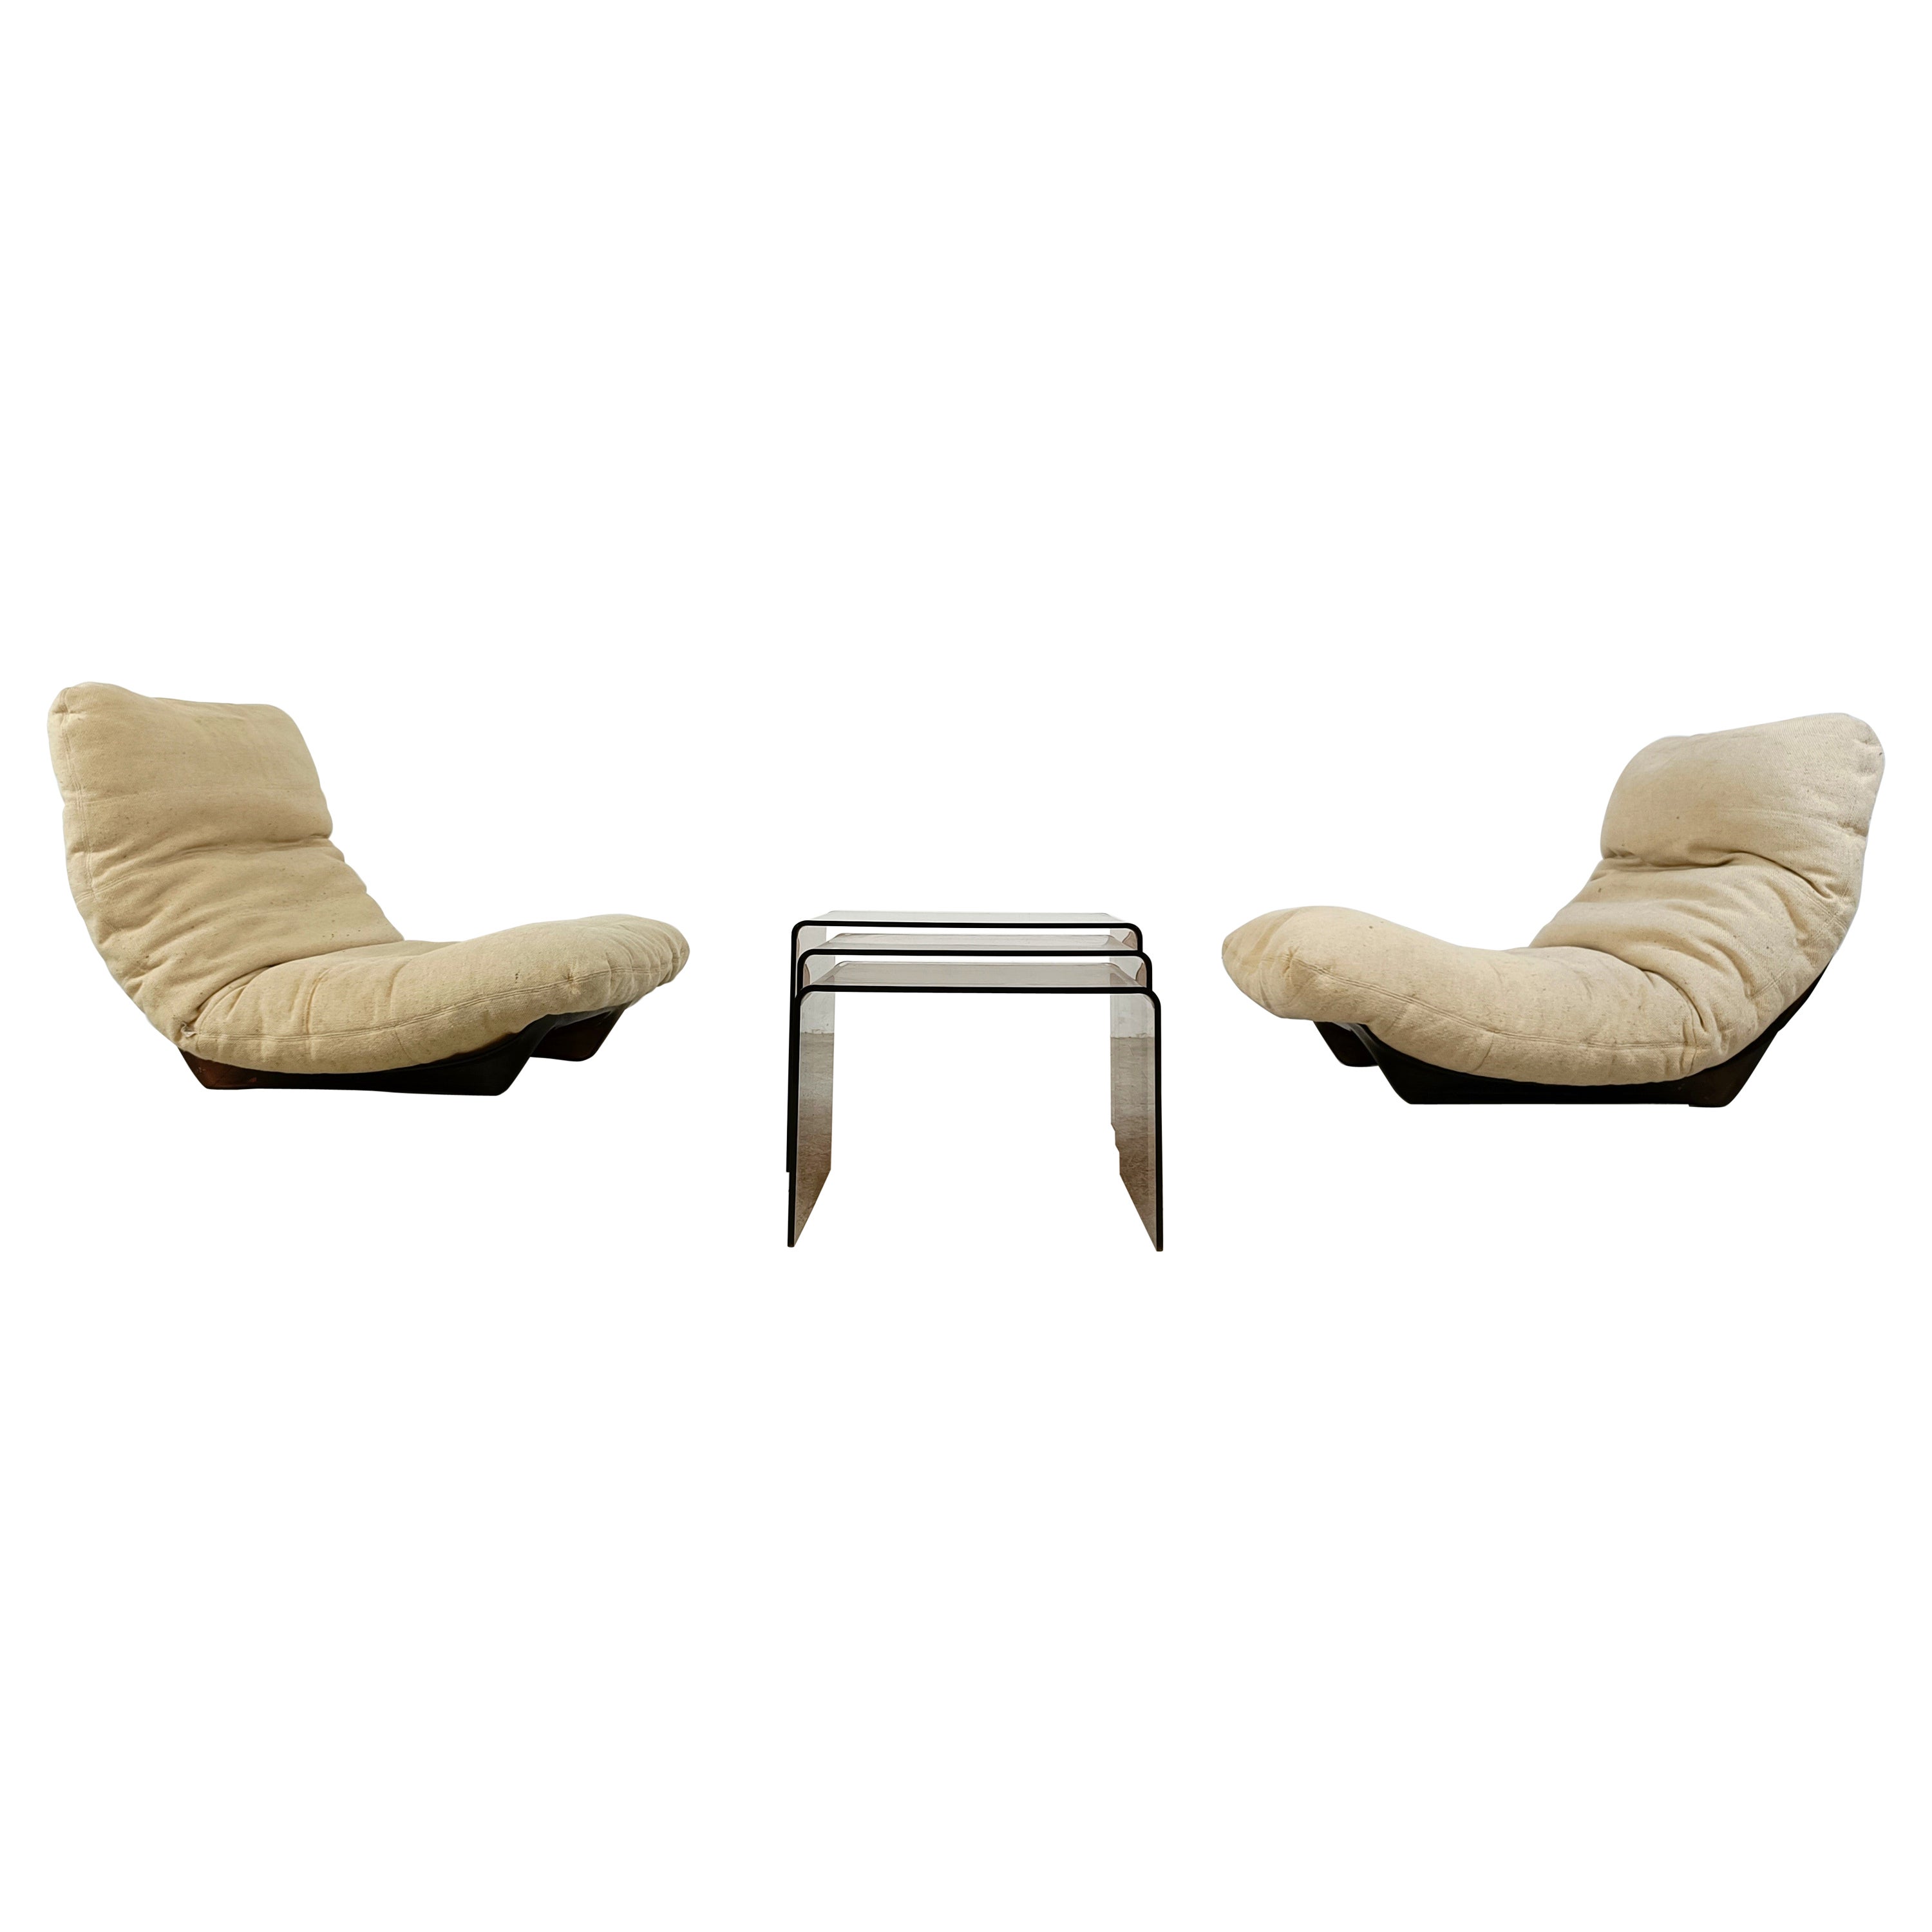 Pair of Marsala lounge chairs with matching tables by Michel Ducaroy 